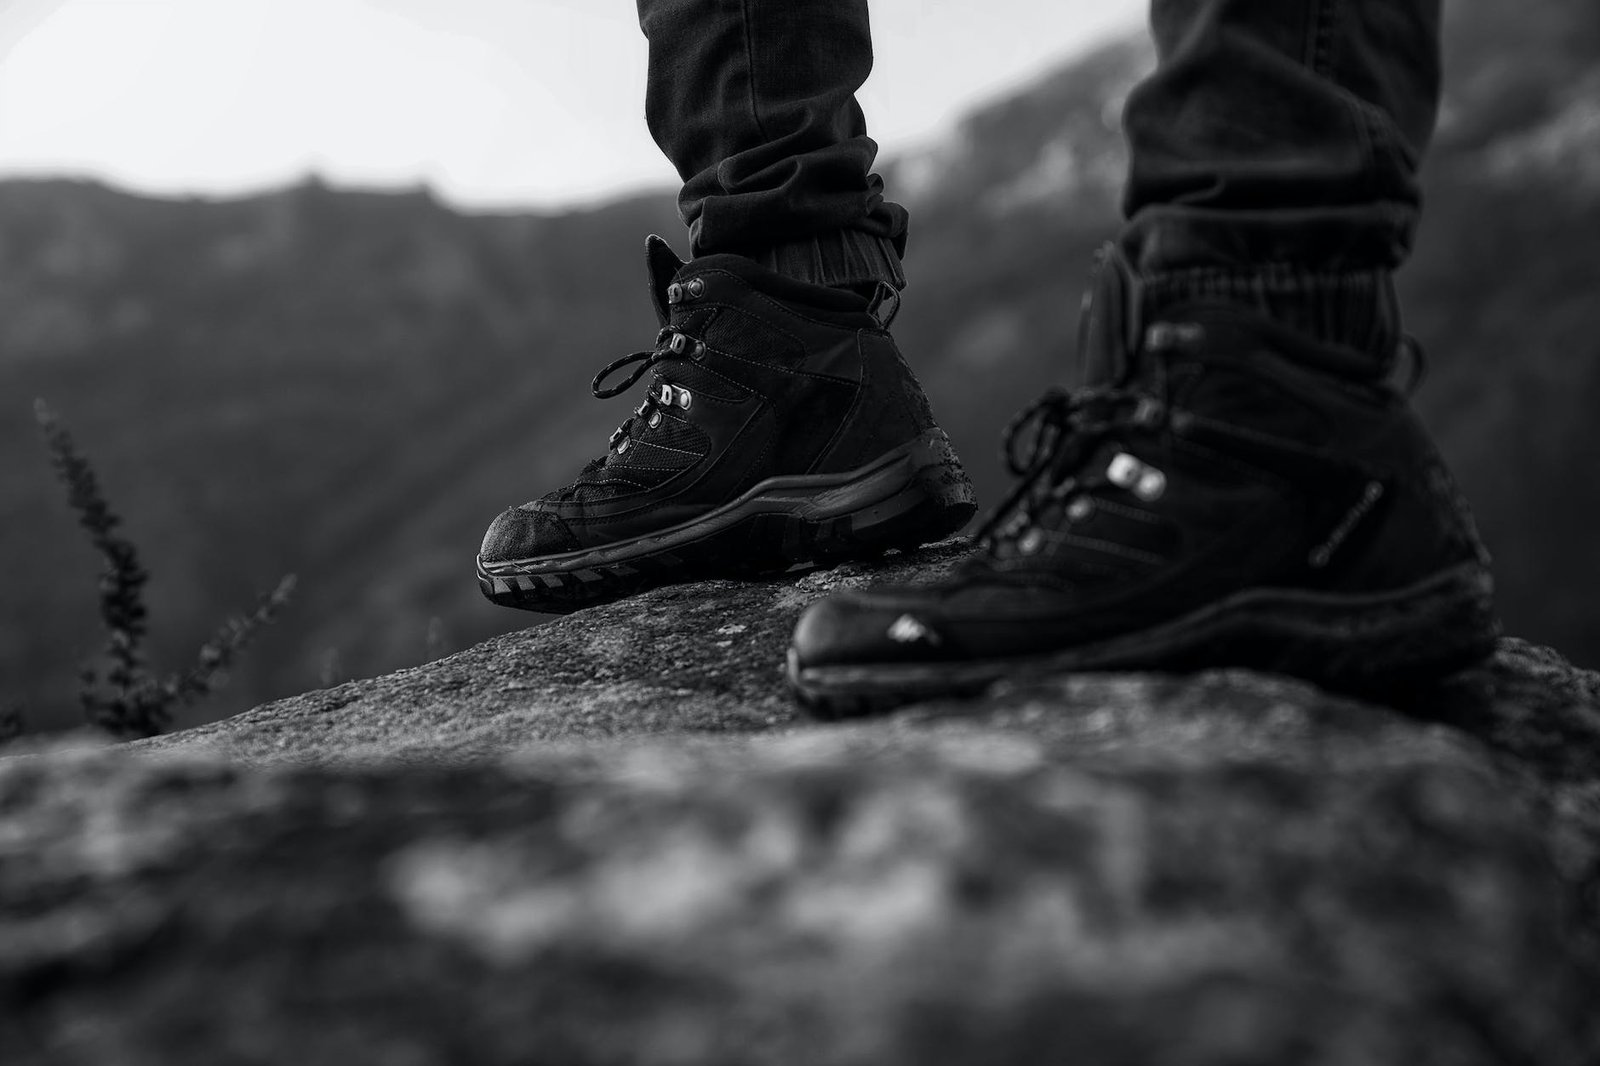 monochrome photo of person wearing black shoes